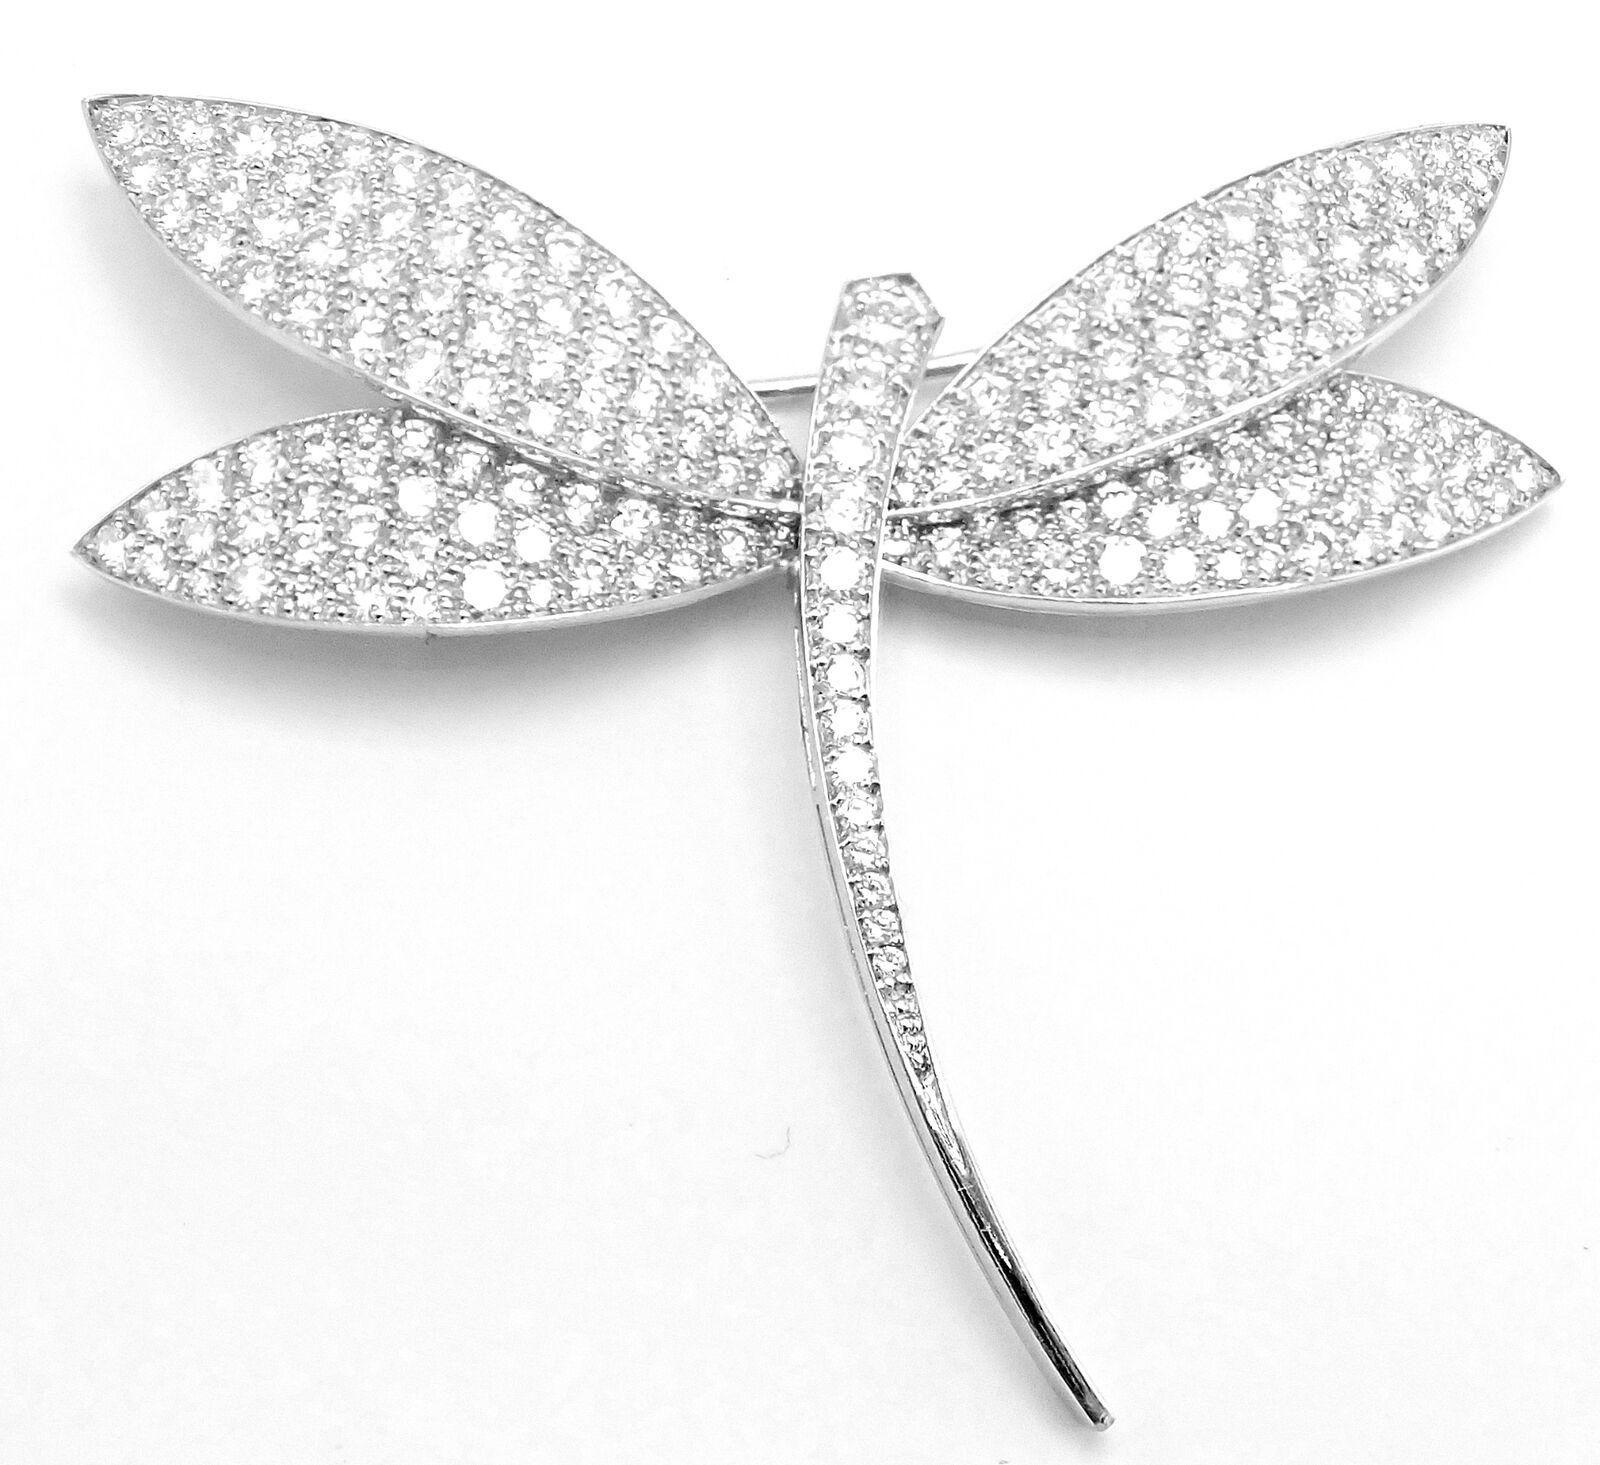 Van Cleef & Arpels Dragonfly Diamond Large White Gold Pin Brooch 3